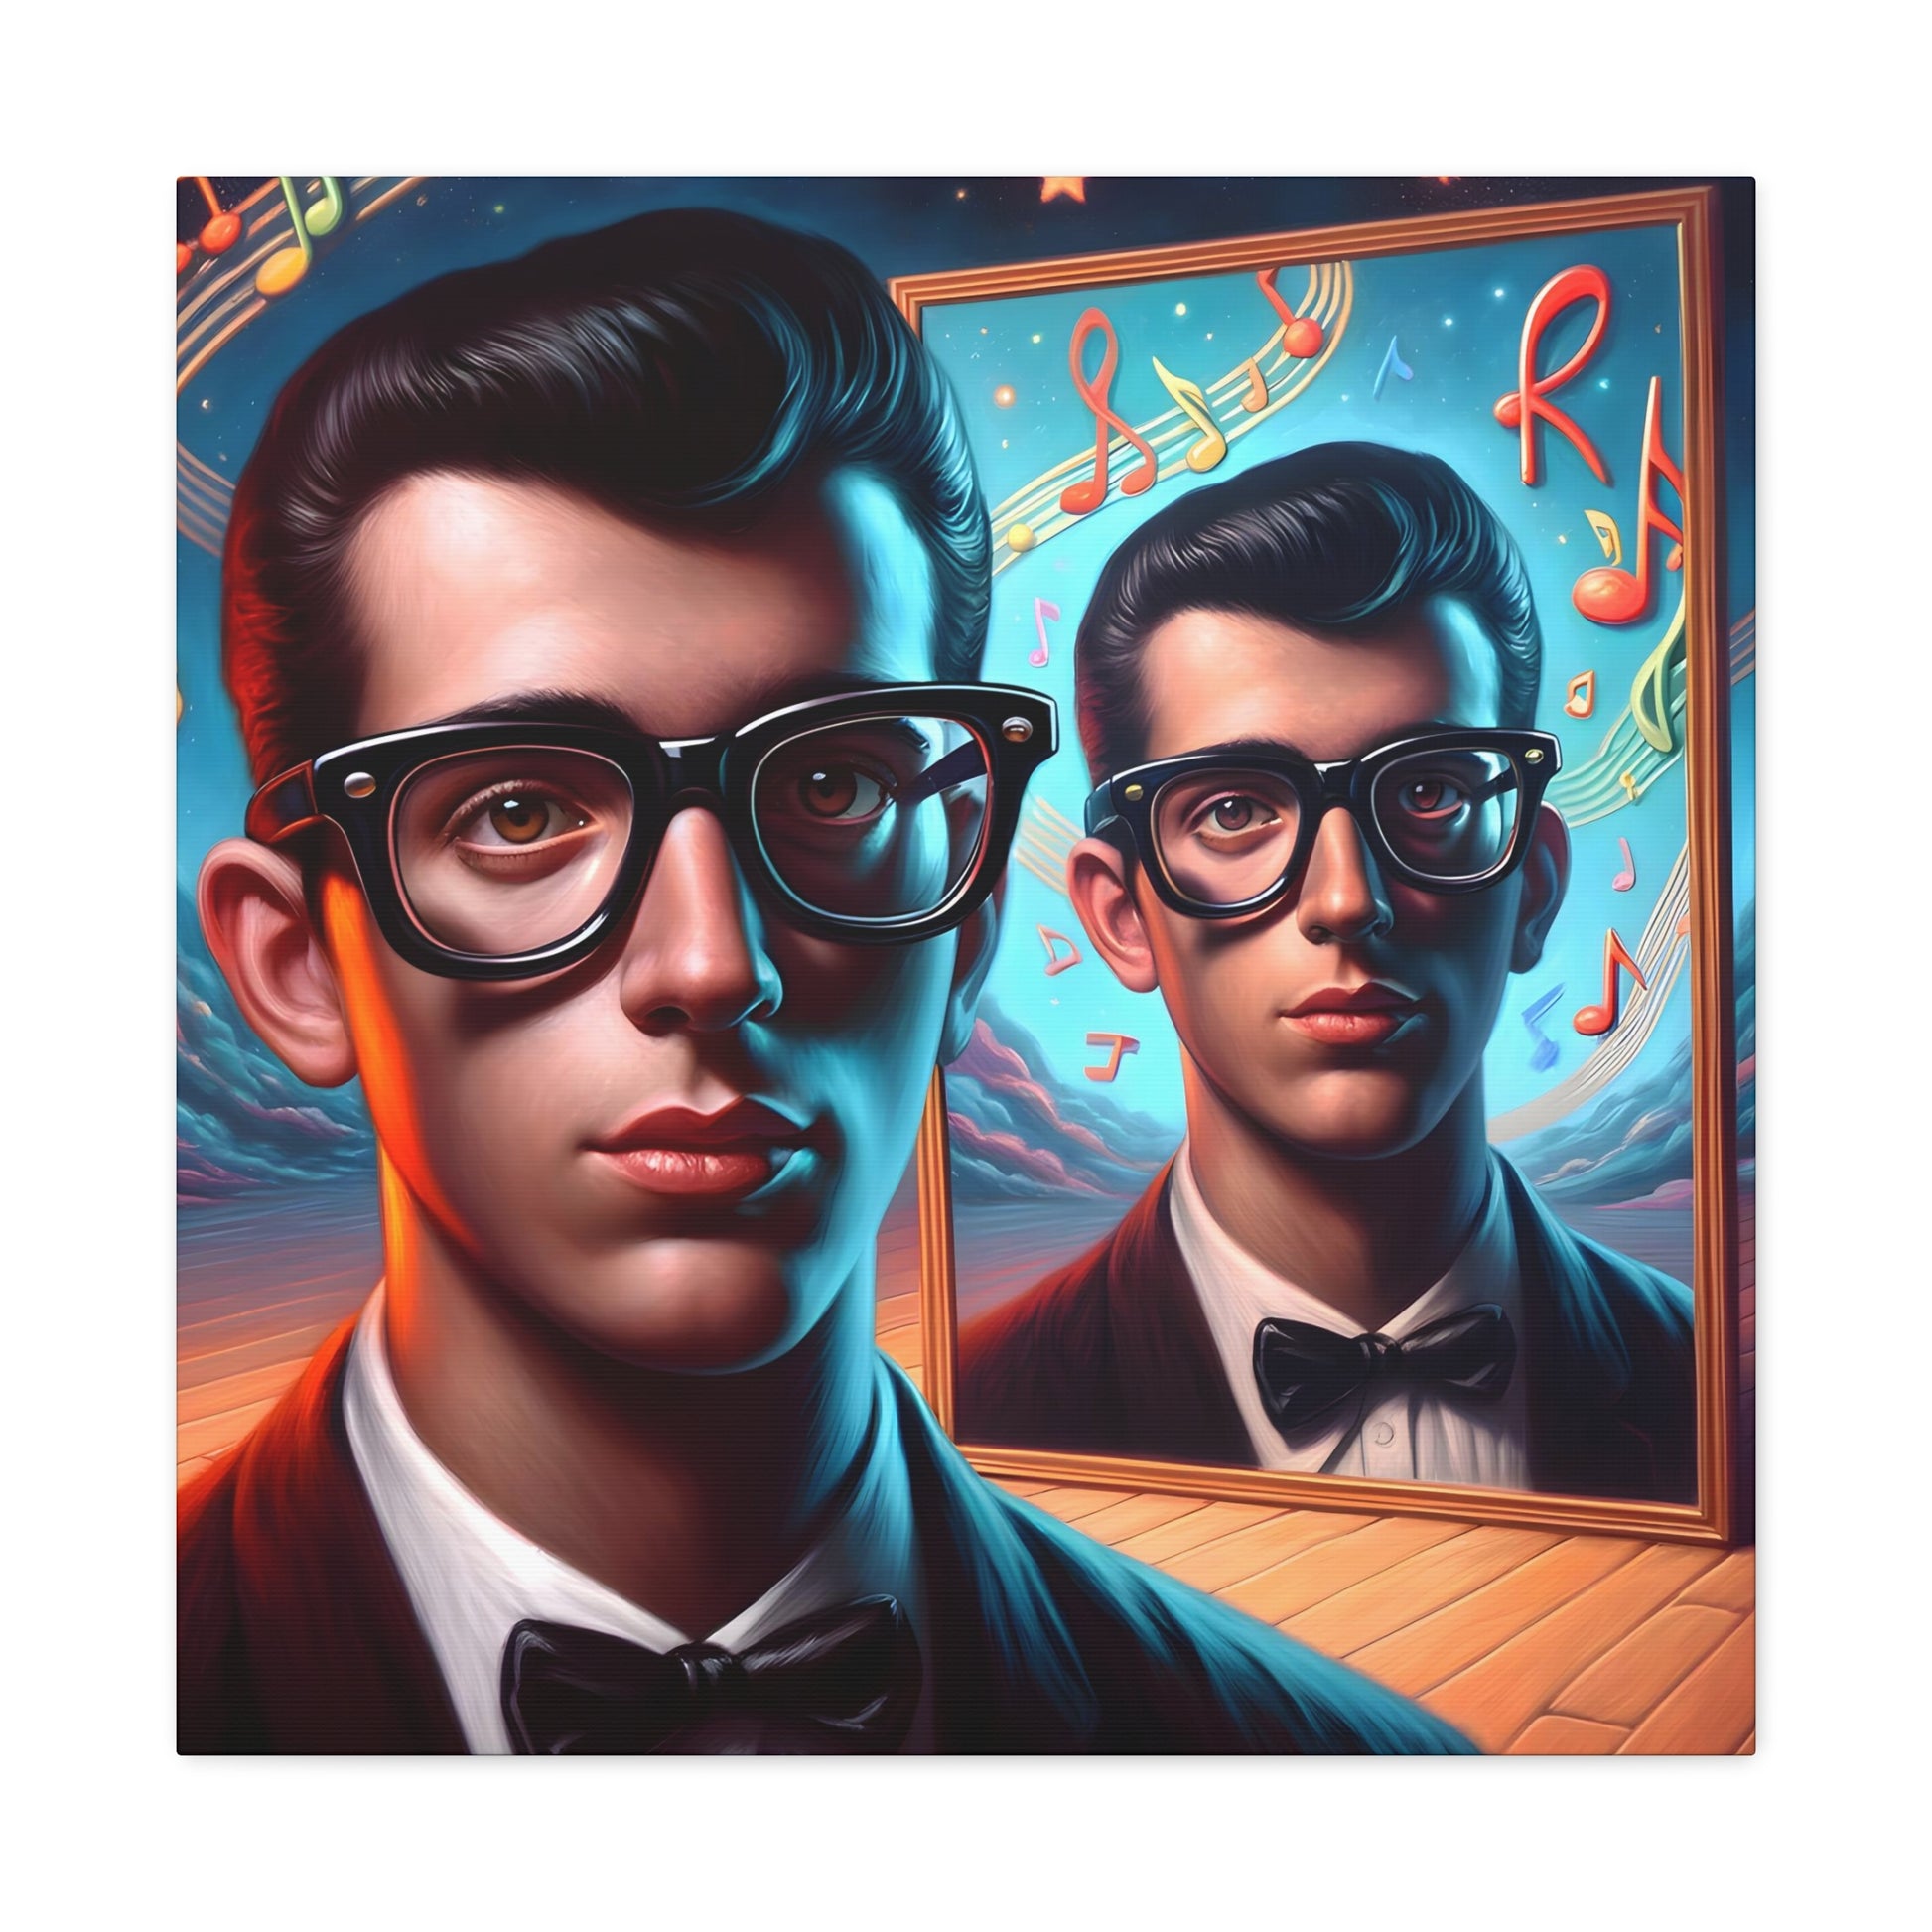 image 3 Vibrant retro-inspired artwork capturing the essence of the 1950s rock and roll era. Features a cool vintage figure with slick hair and thick-rimmed glasses, gazing into a mirror that reflects a dreamy, music-filled cosmos with musical notes and celestial bodies. Warm color palette with twilight blues, depicting an intimate yet imaginative scene reminiscent of vinyl and jukeboxes.